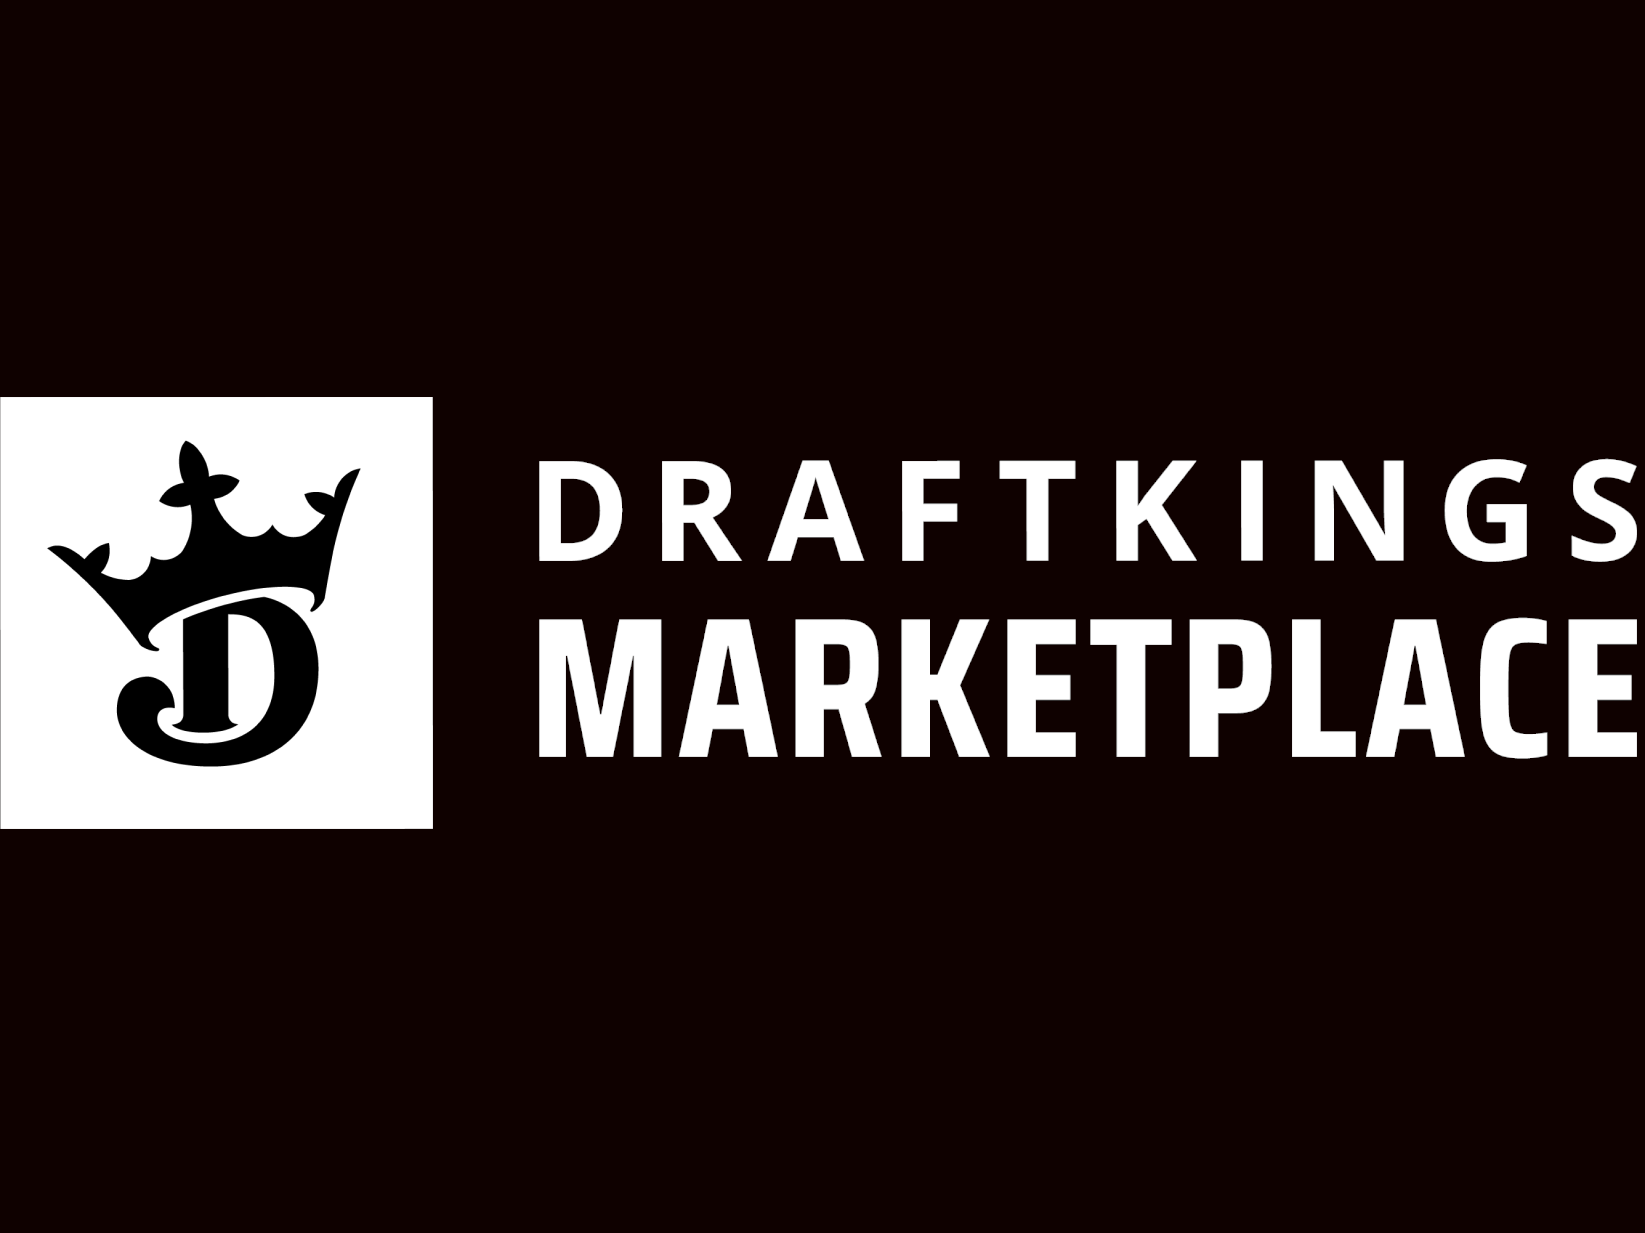 DraftKings NFTs Explained: How to Buy & Sell NFTs on the DraftKings Marketplace. How to use to buy & sell premium DraftKings NFTs across sports, entertainment, & culture. Build your collection or make money selling NFTs.